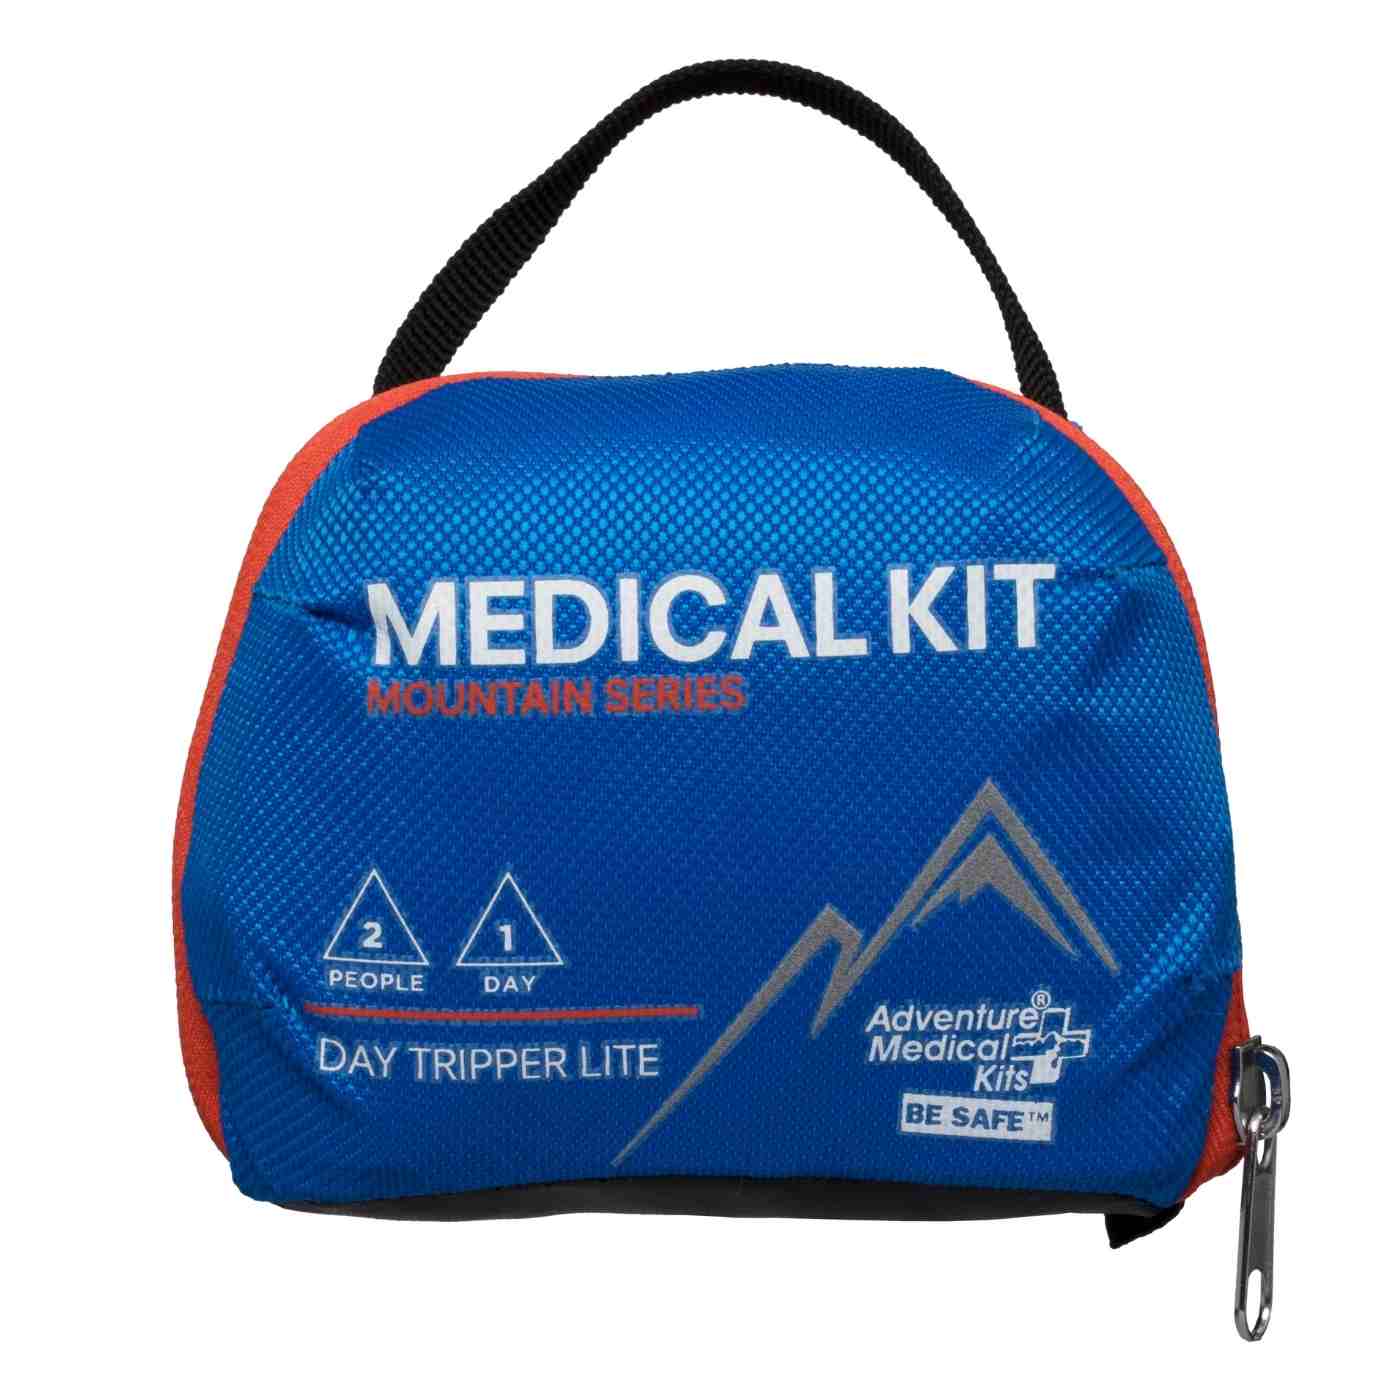 Mountain Series Medical Kit - Day Tripper Lite front